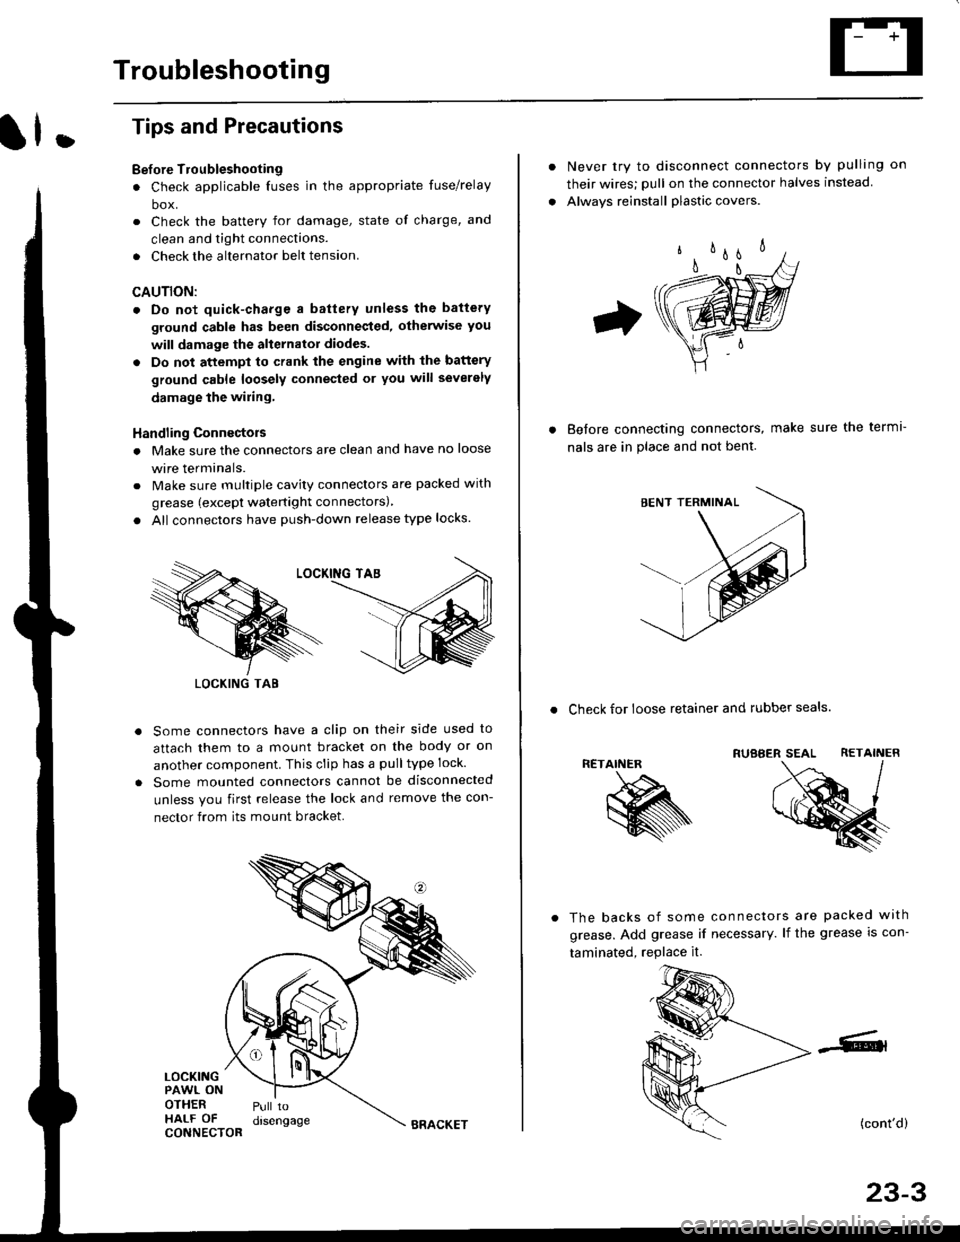 HONDA CIVIC 1997 6.G Workshop Manual Troubleshooting
ll.
Tips and Precautions
Bef ore Troubleshooting
. Check applicable fuses in the appropriate fuse/relay
box.
. Check the battery for damage, state of charge, and
clean and tight connec